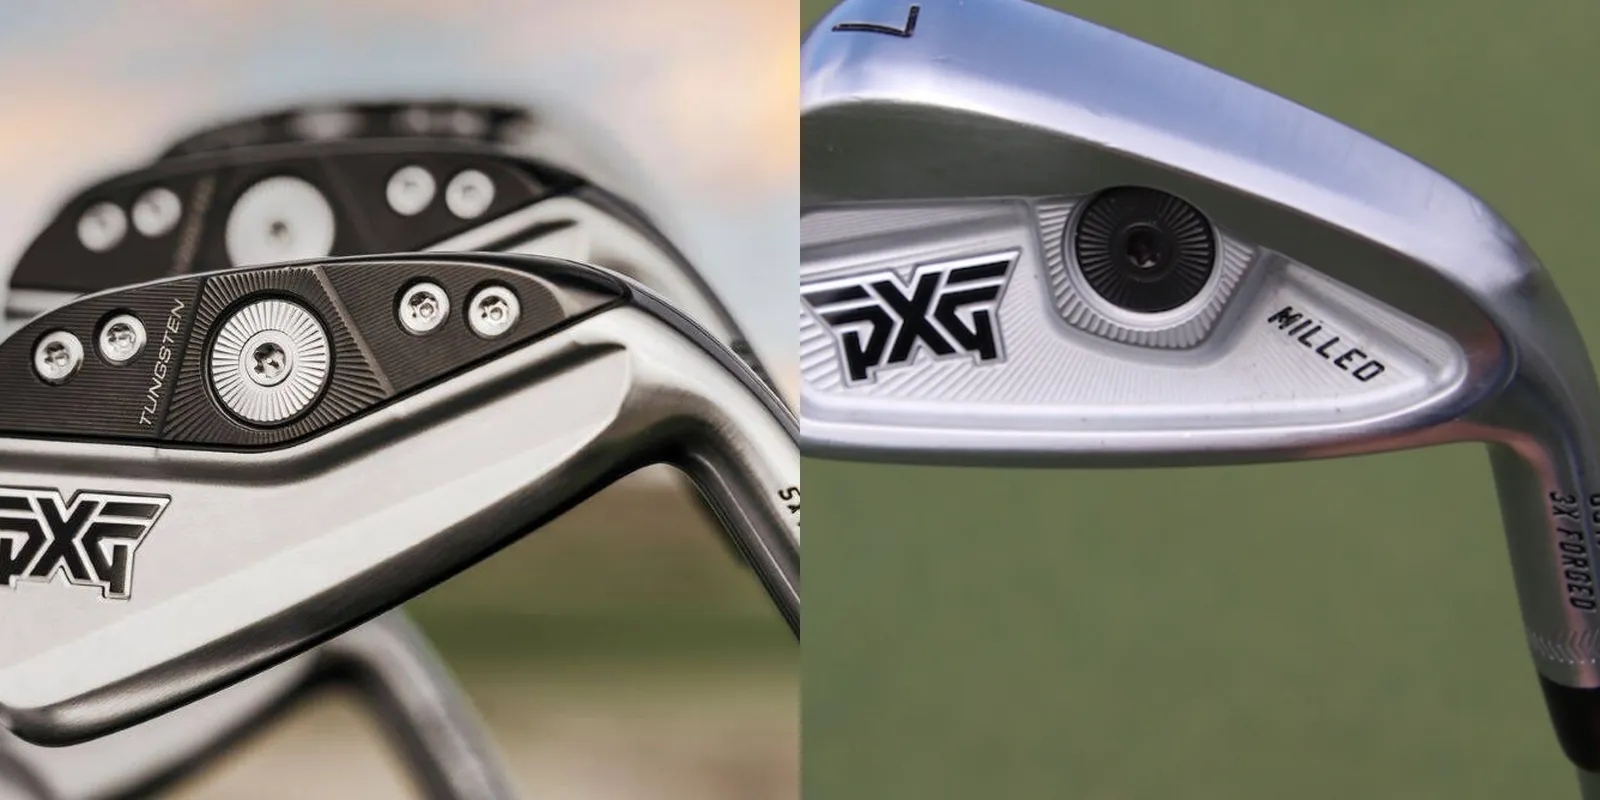 PXG 0317 ST Players Irons vs  Gen 6 Irons